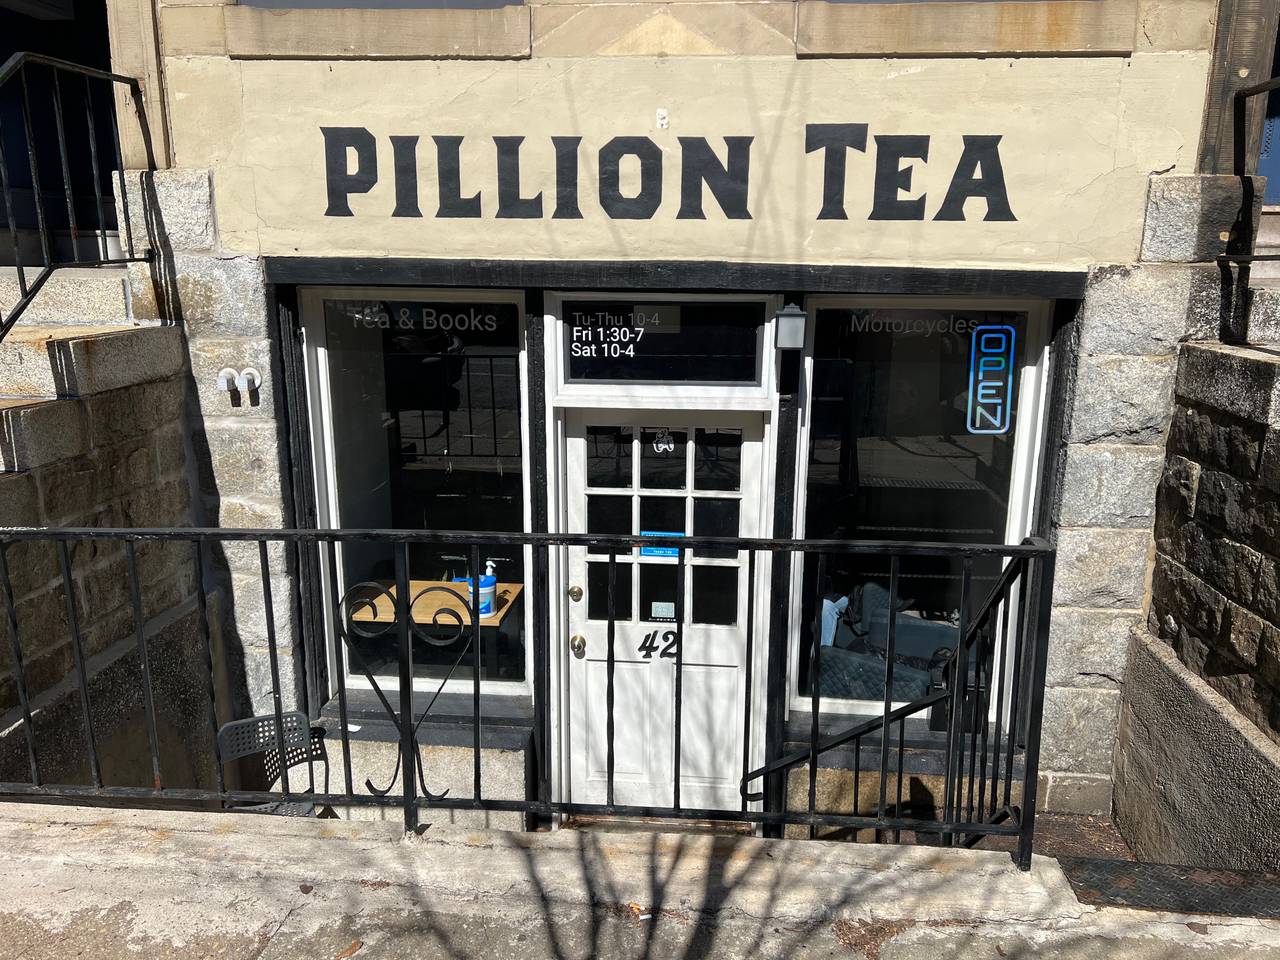 Pillion Tea is a place to connect with others or to find a quiet reprieve, says co-owner Zena Lichter.